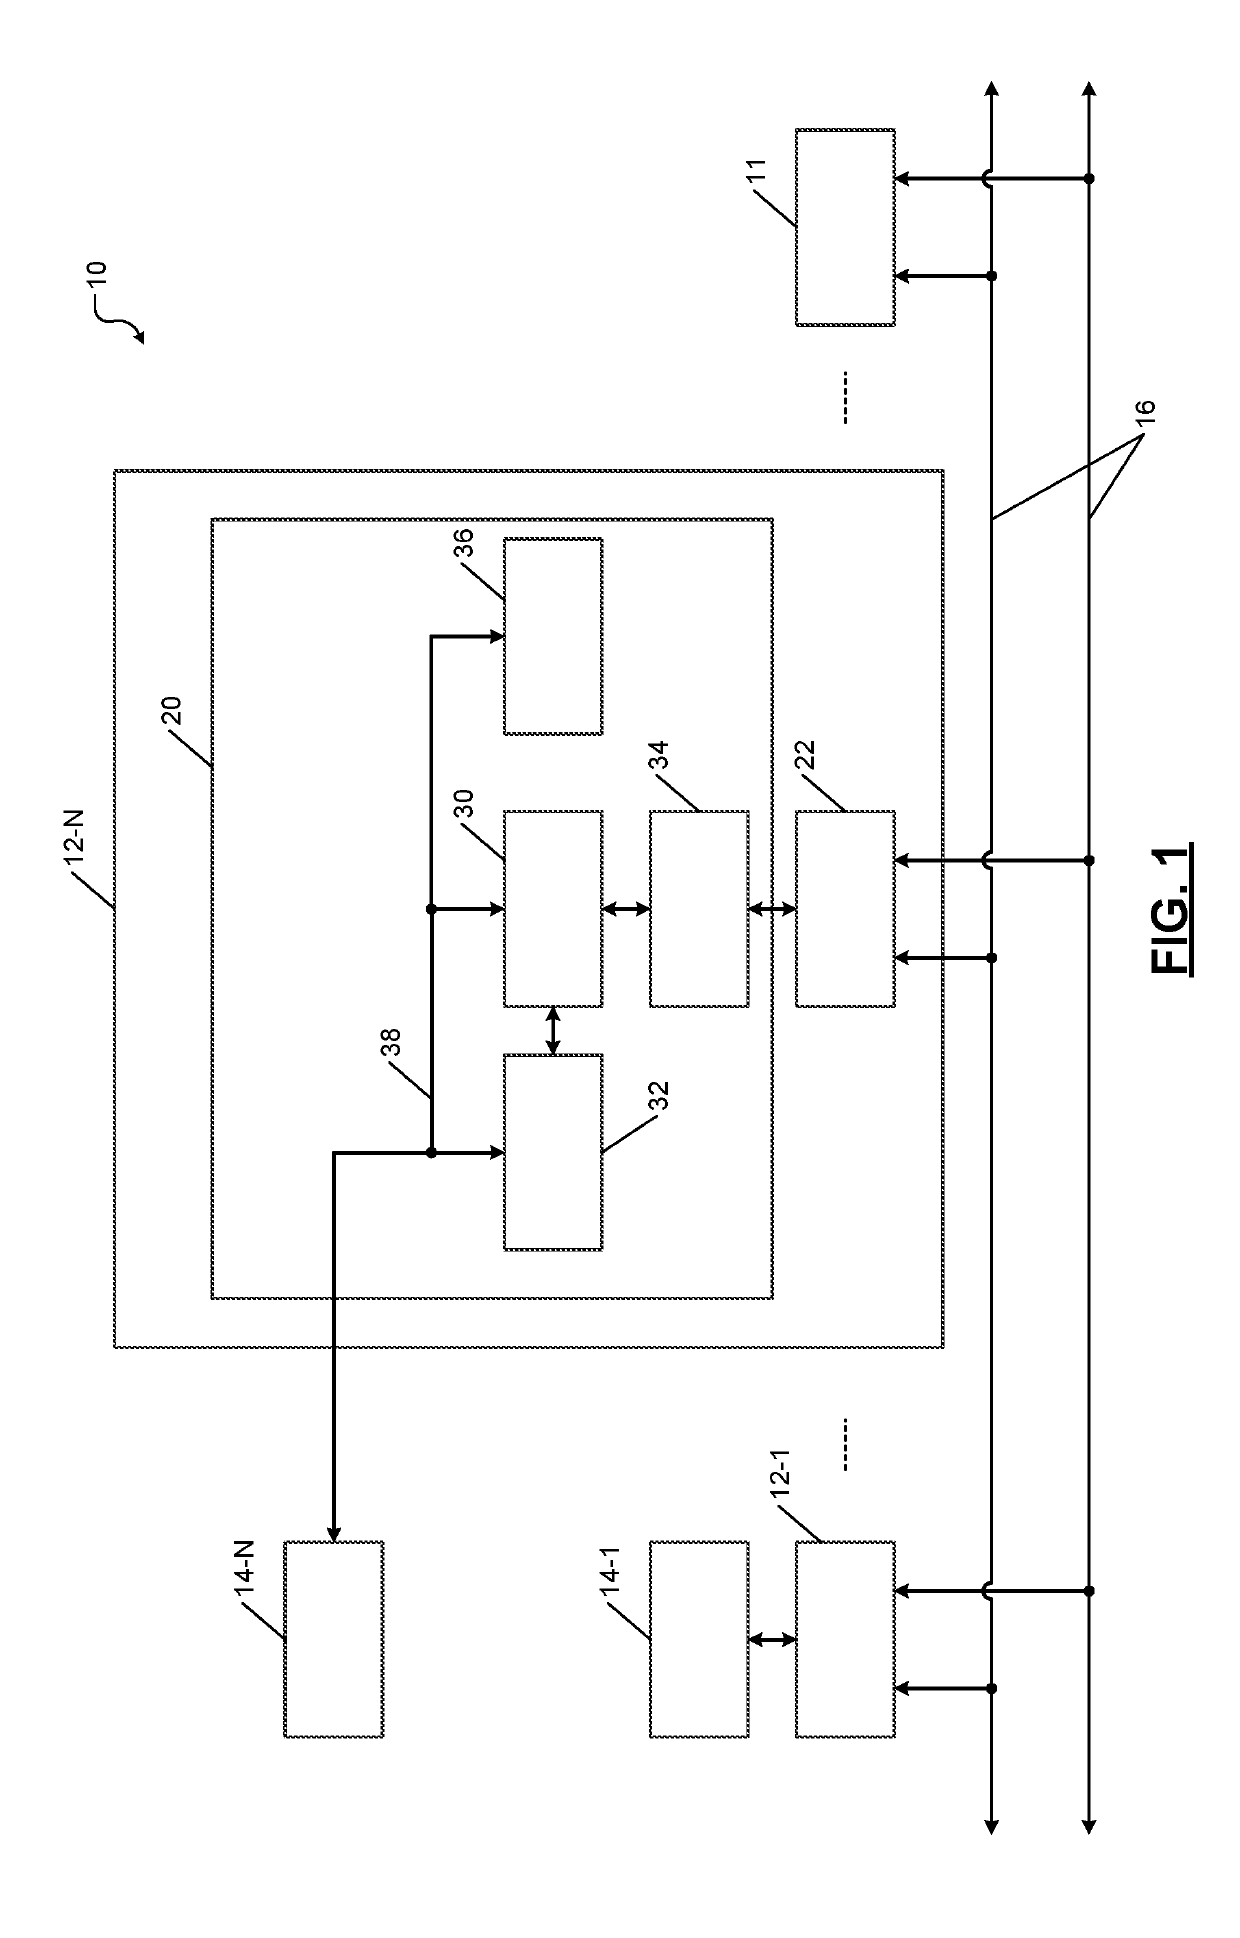 Profile building using occupant stress evaluation and profile matching for vehicle environment tuning during ride sharing